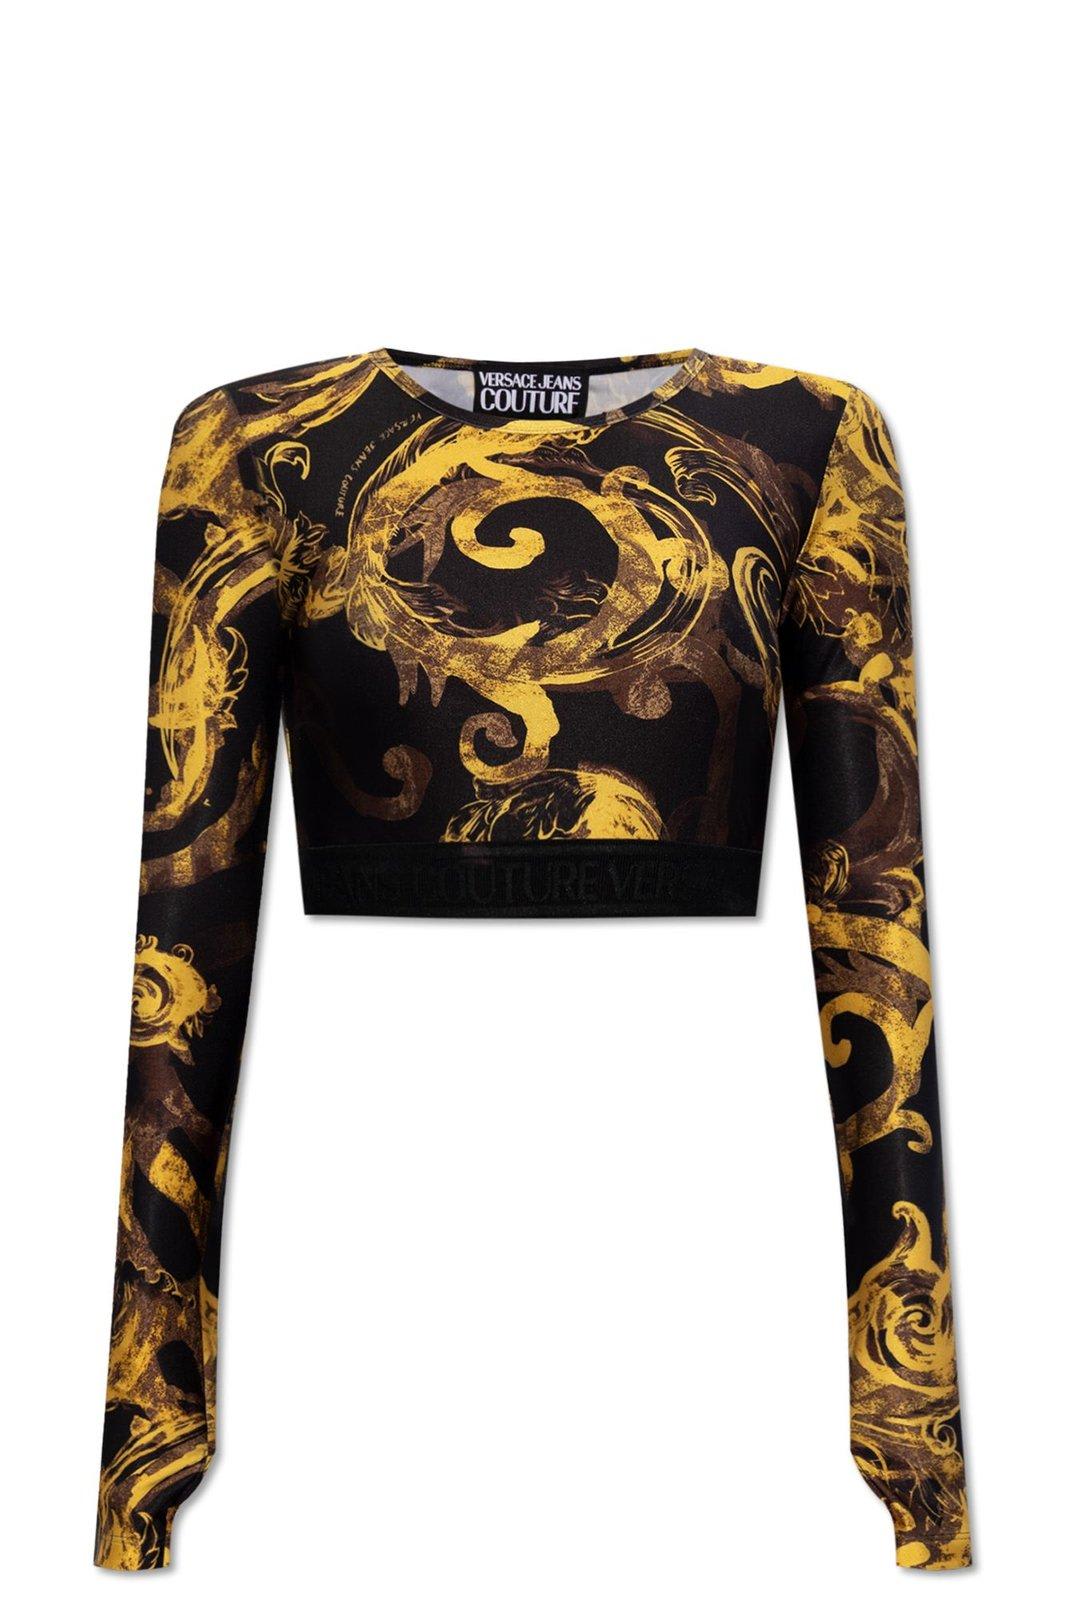 VERSACE JEANS COUTURE BAROCCO PRINT CROPPED TOP